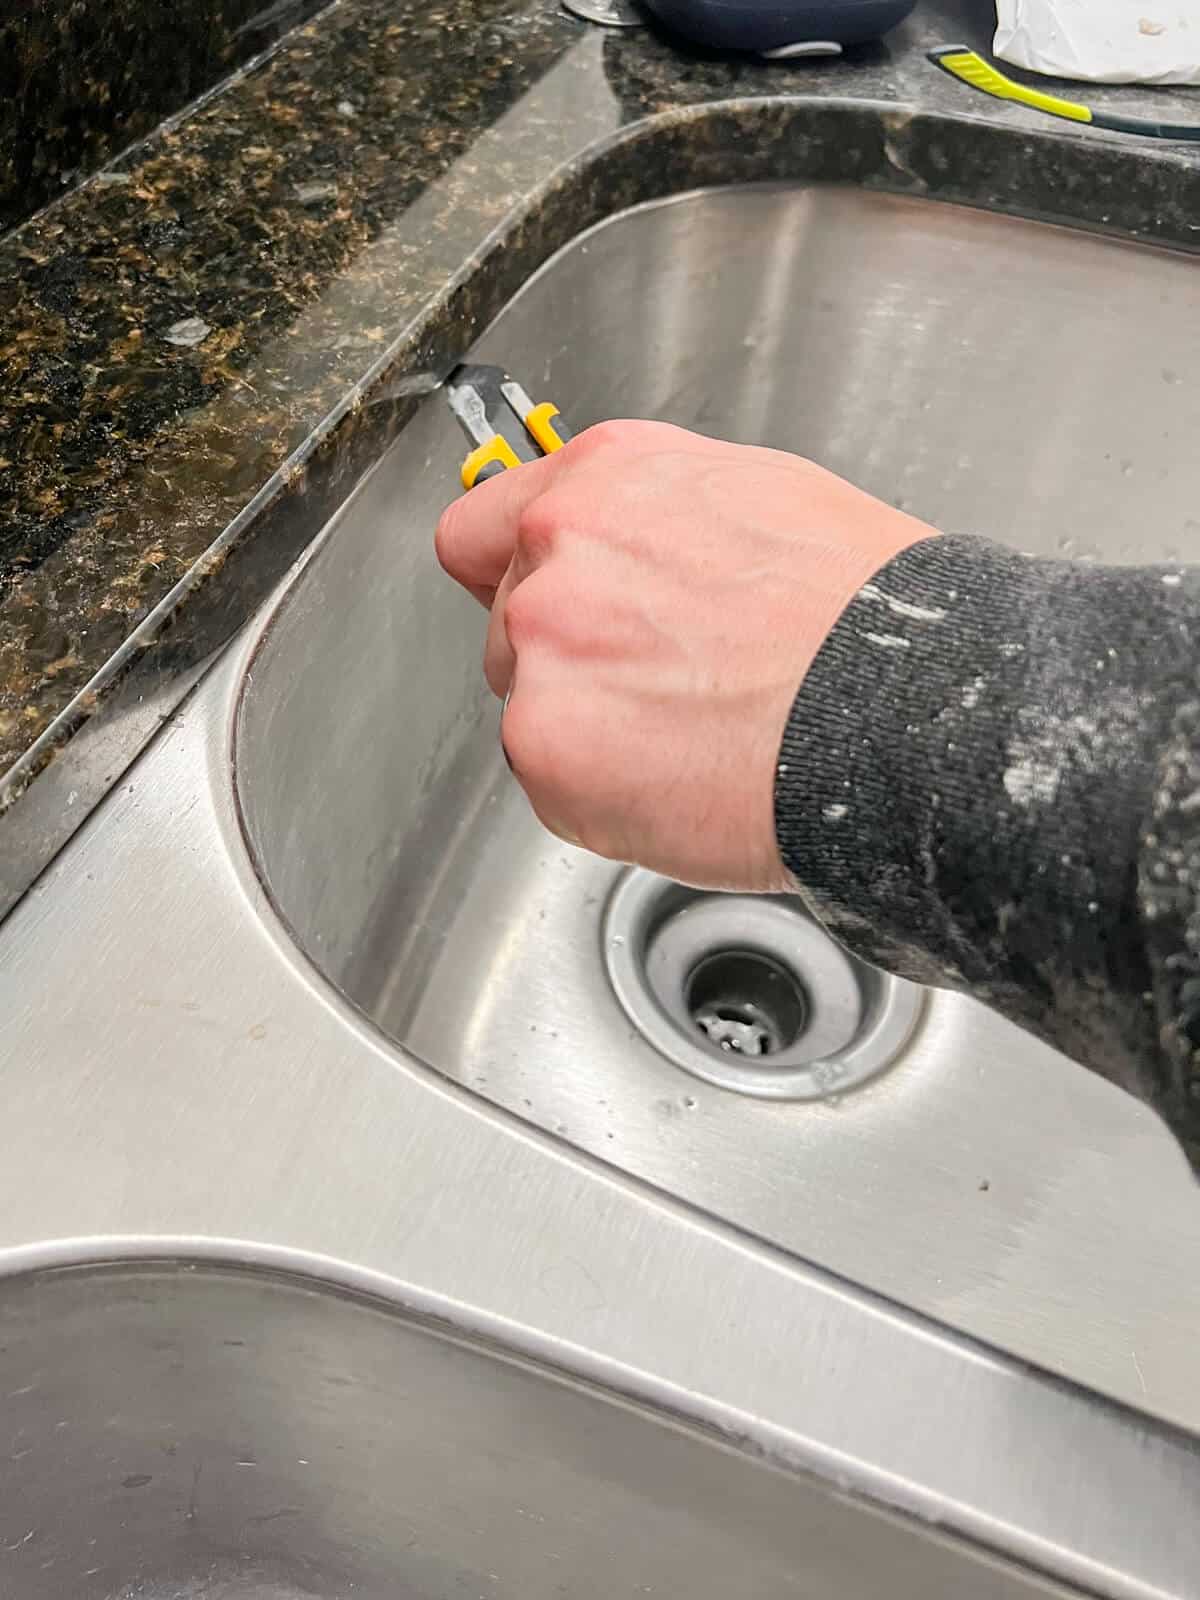 cutting away silicone from a stainless steel undermount sink for removal